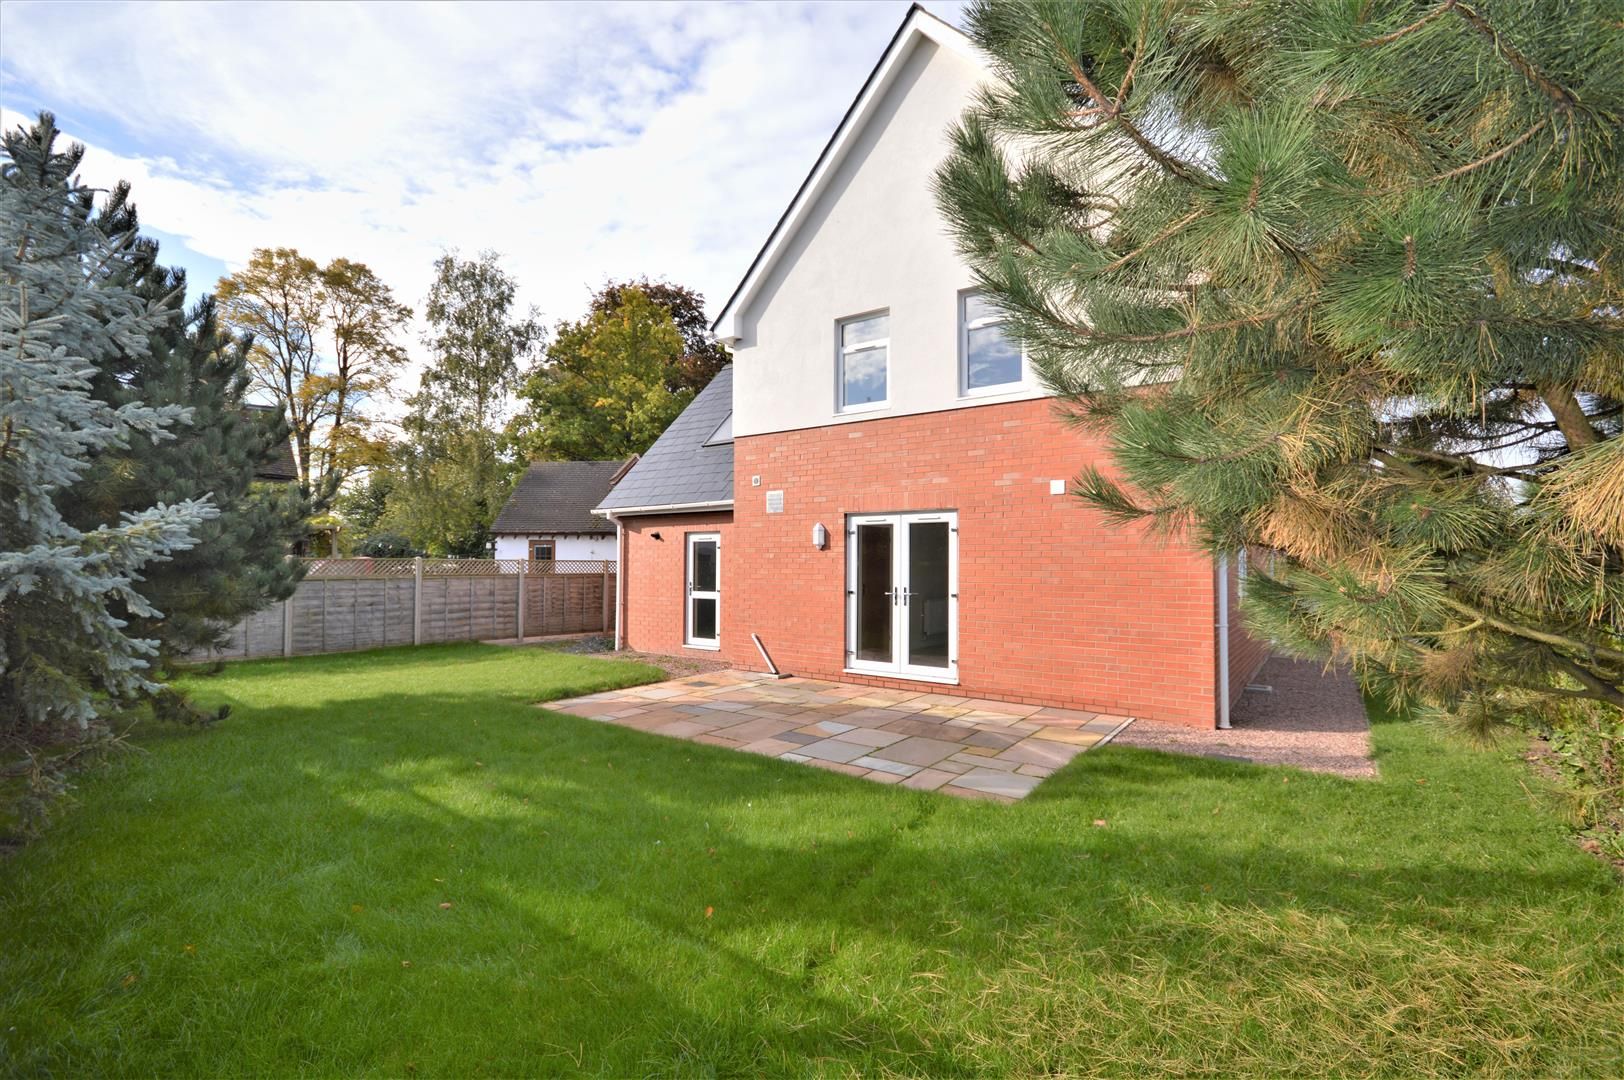 4 bed detached for sale in Kings Acre 1